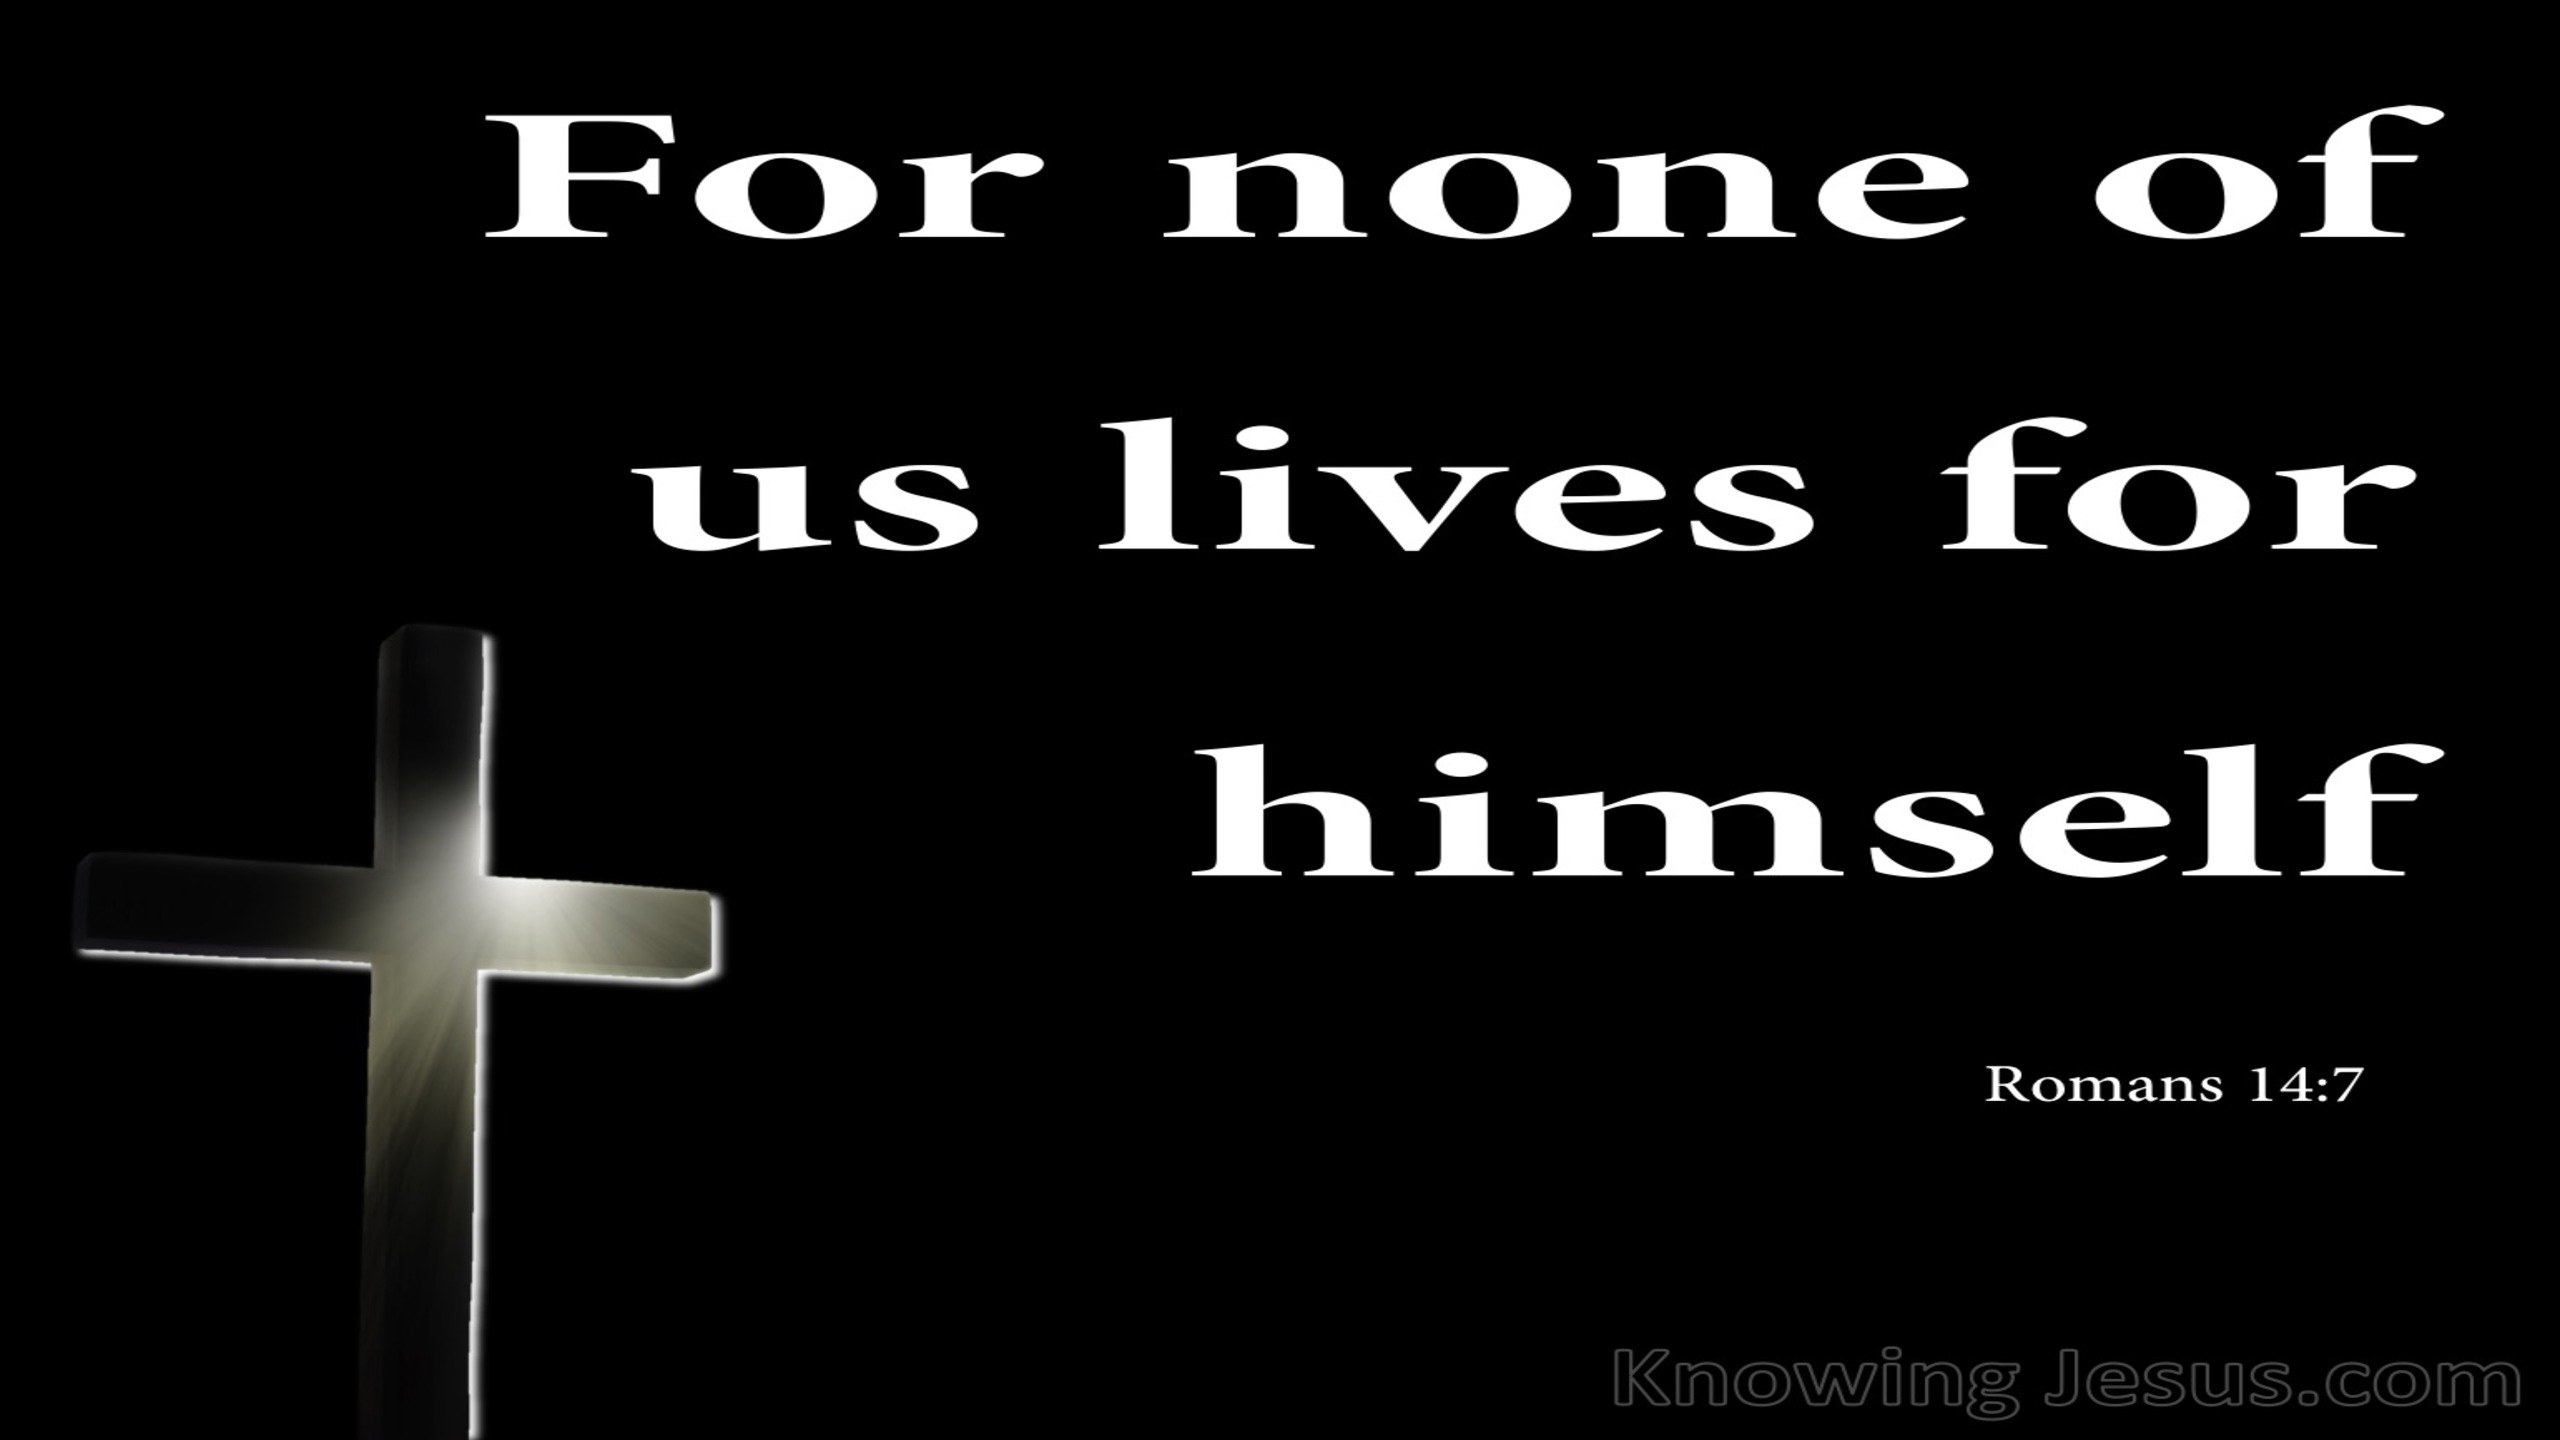 Romans 14:7 For None Of Us Lives For Himself (black)